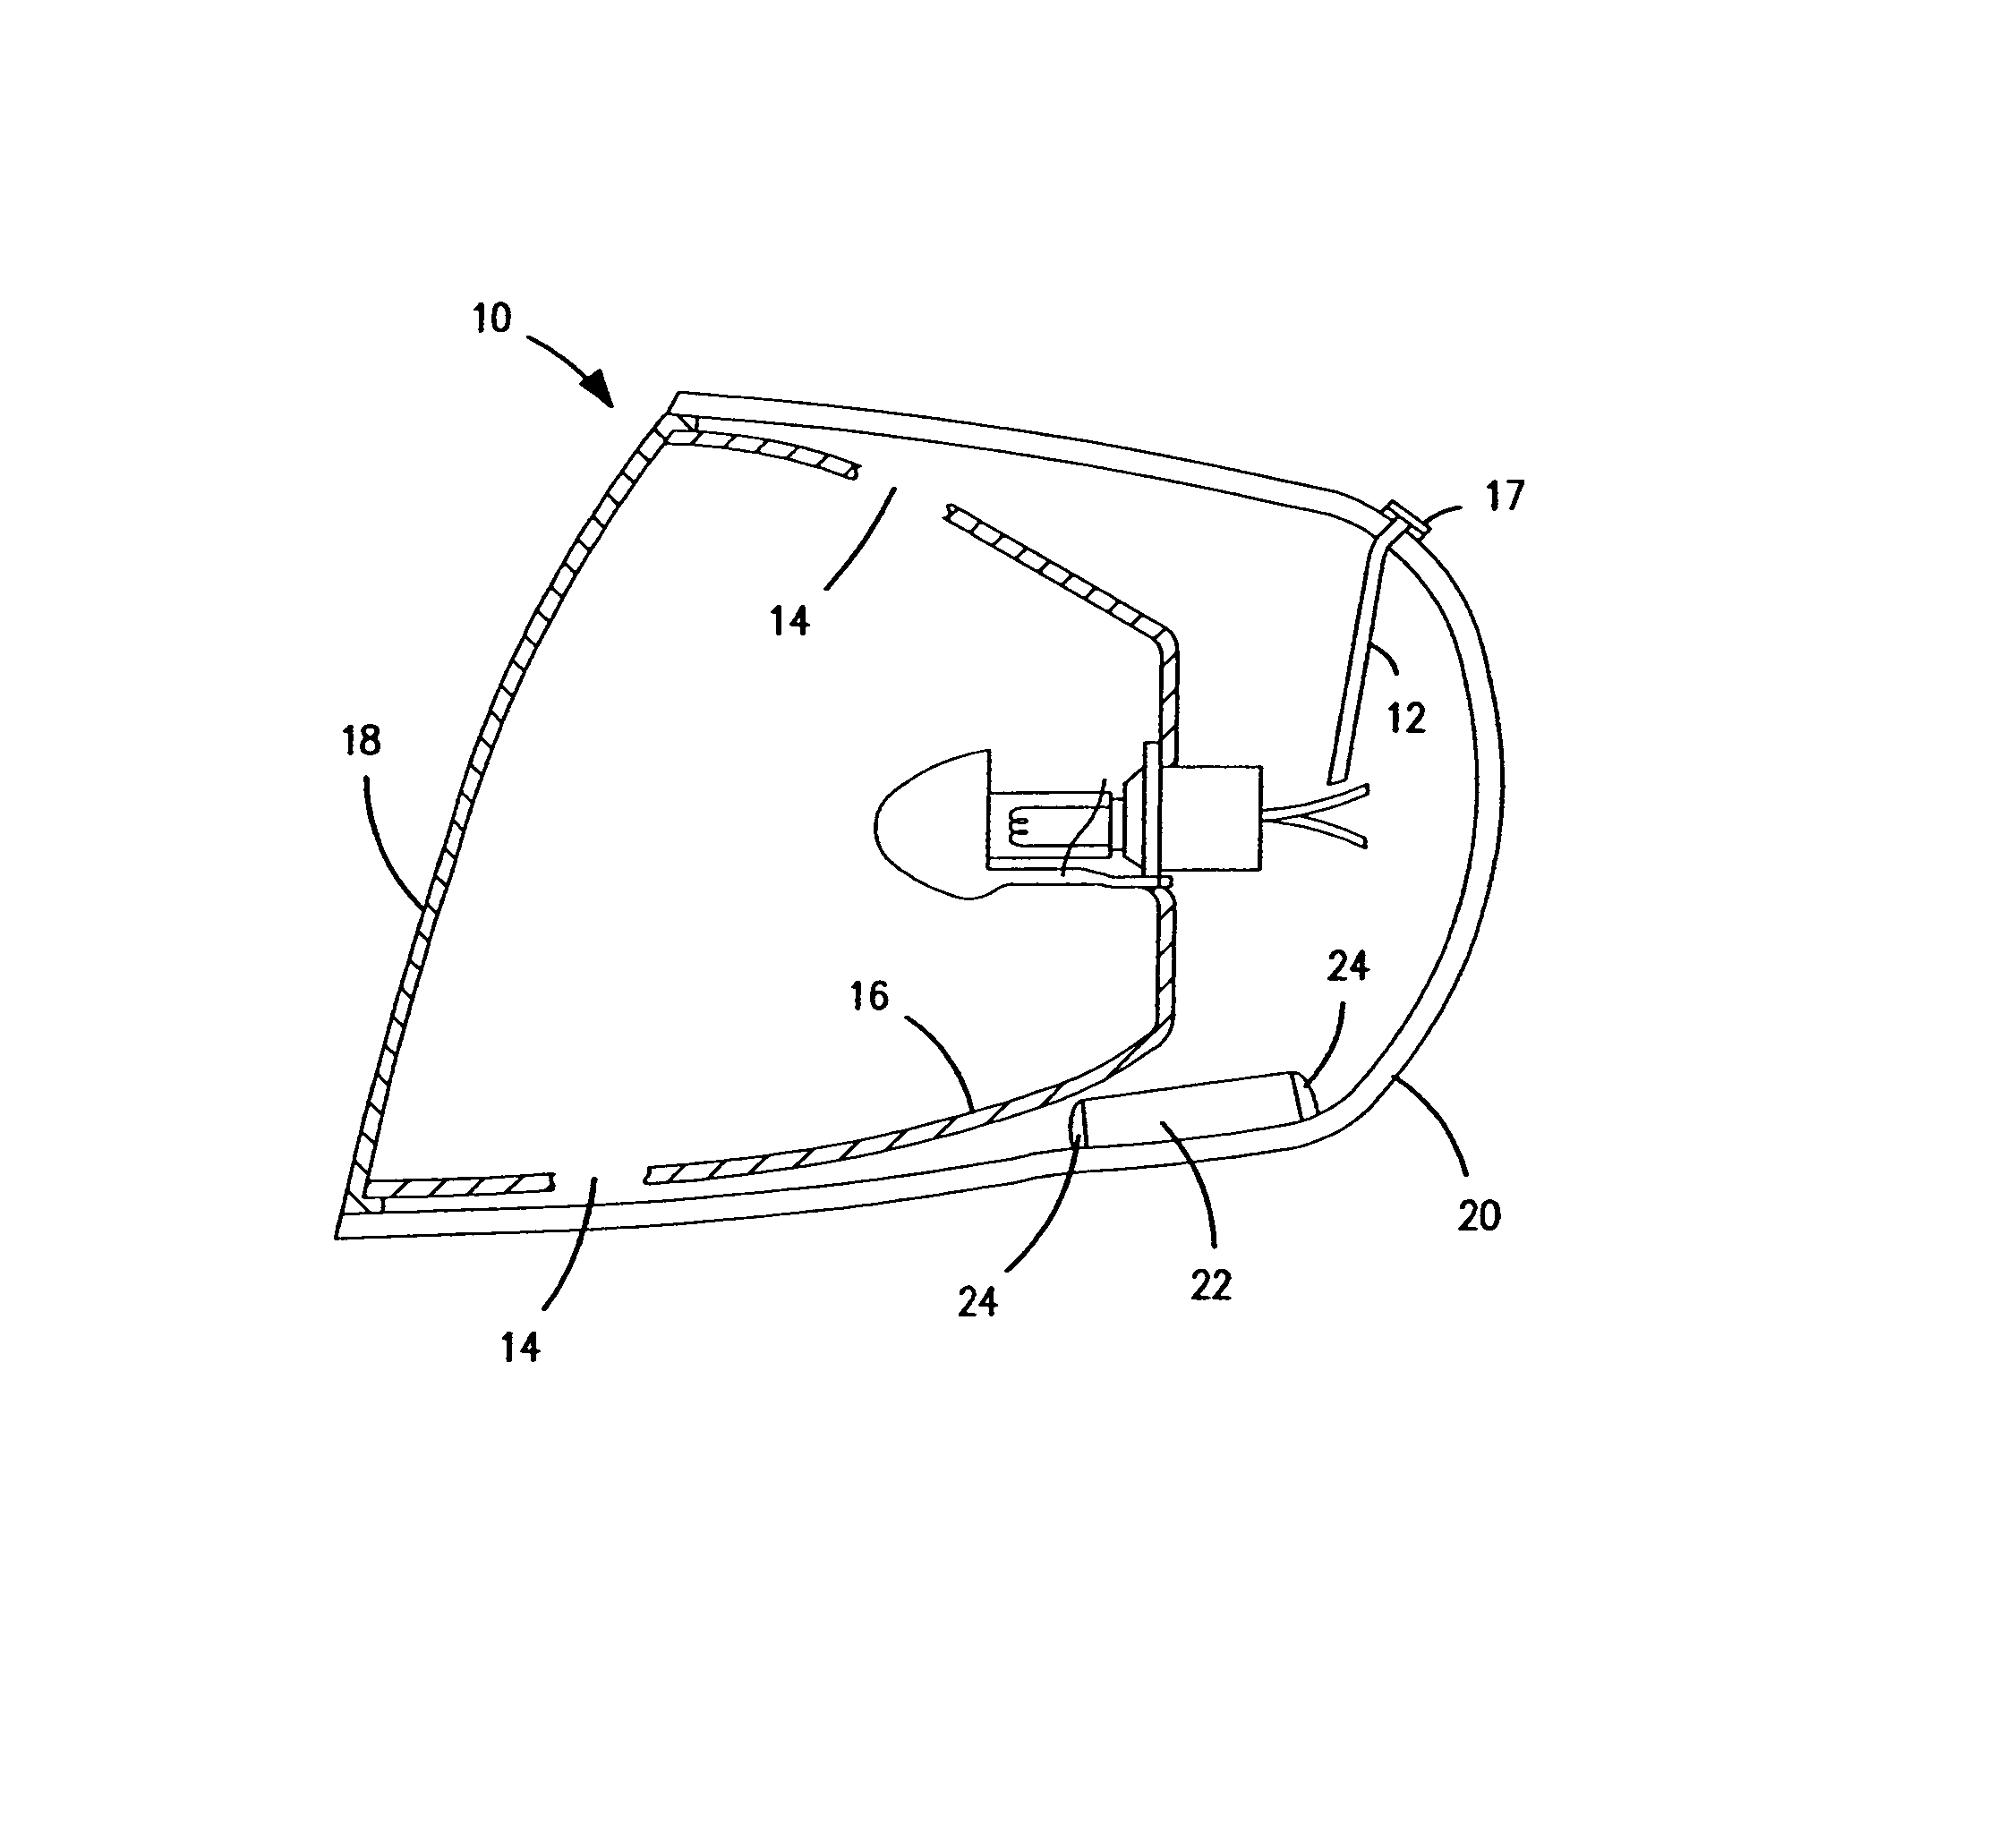 Venting system for minimizing condensation in a lighting assembly